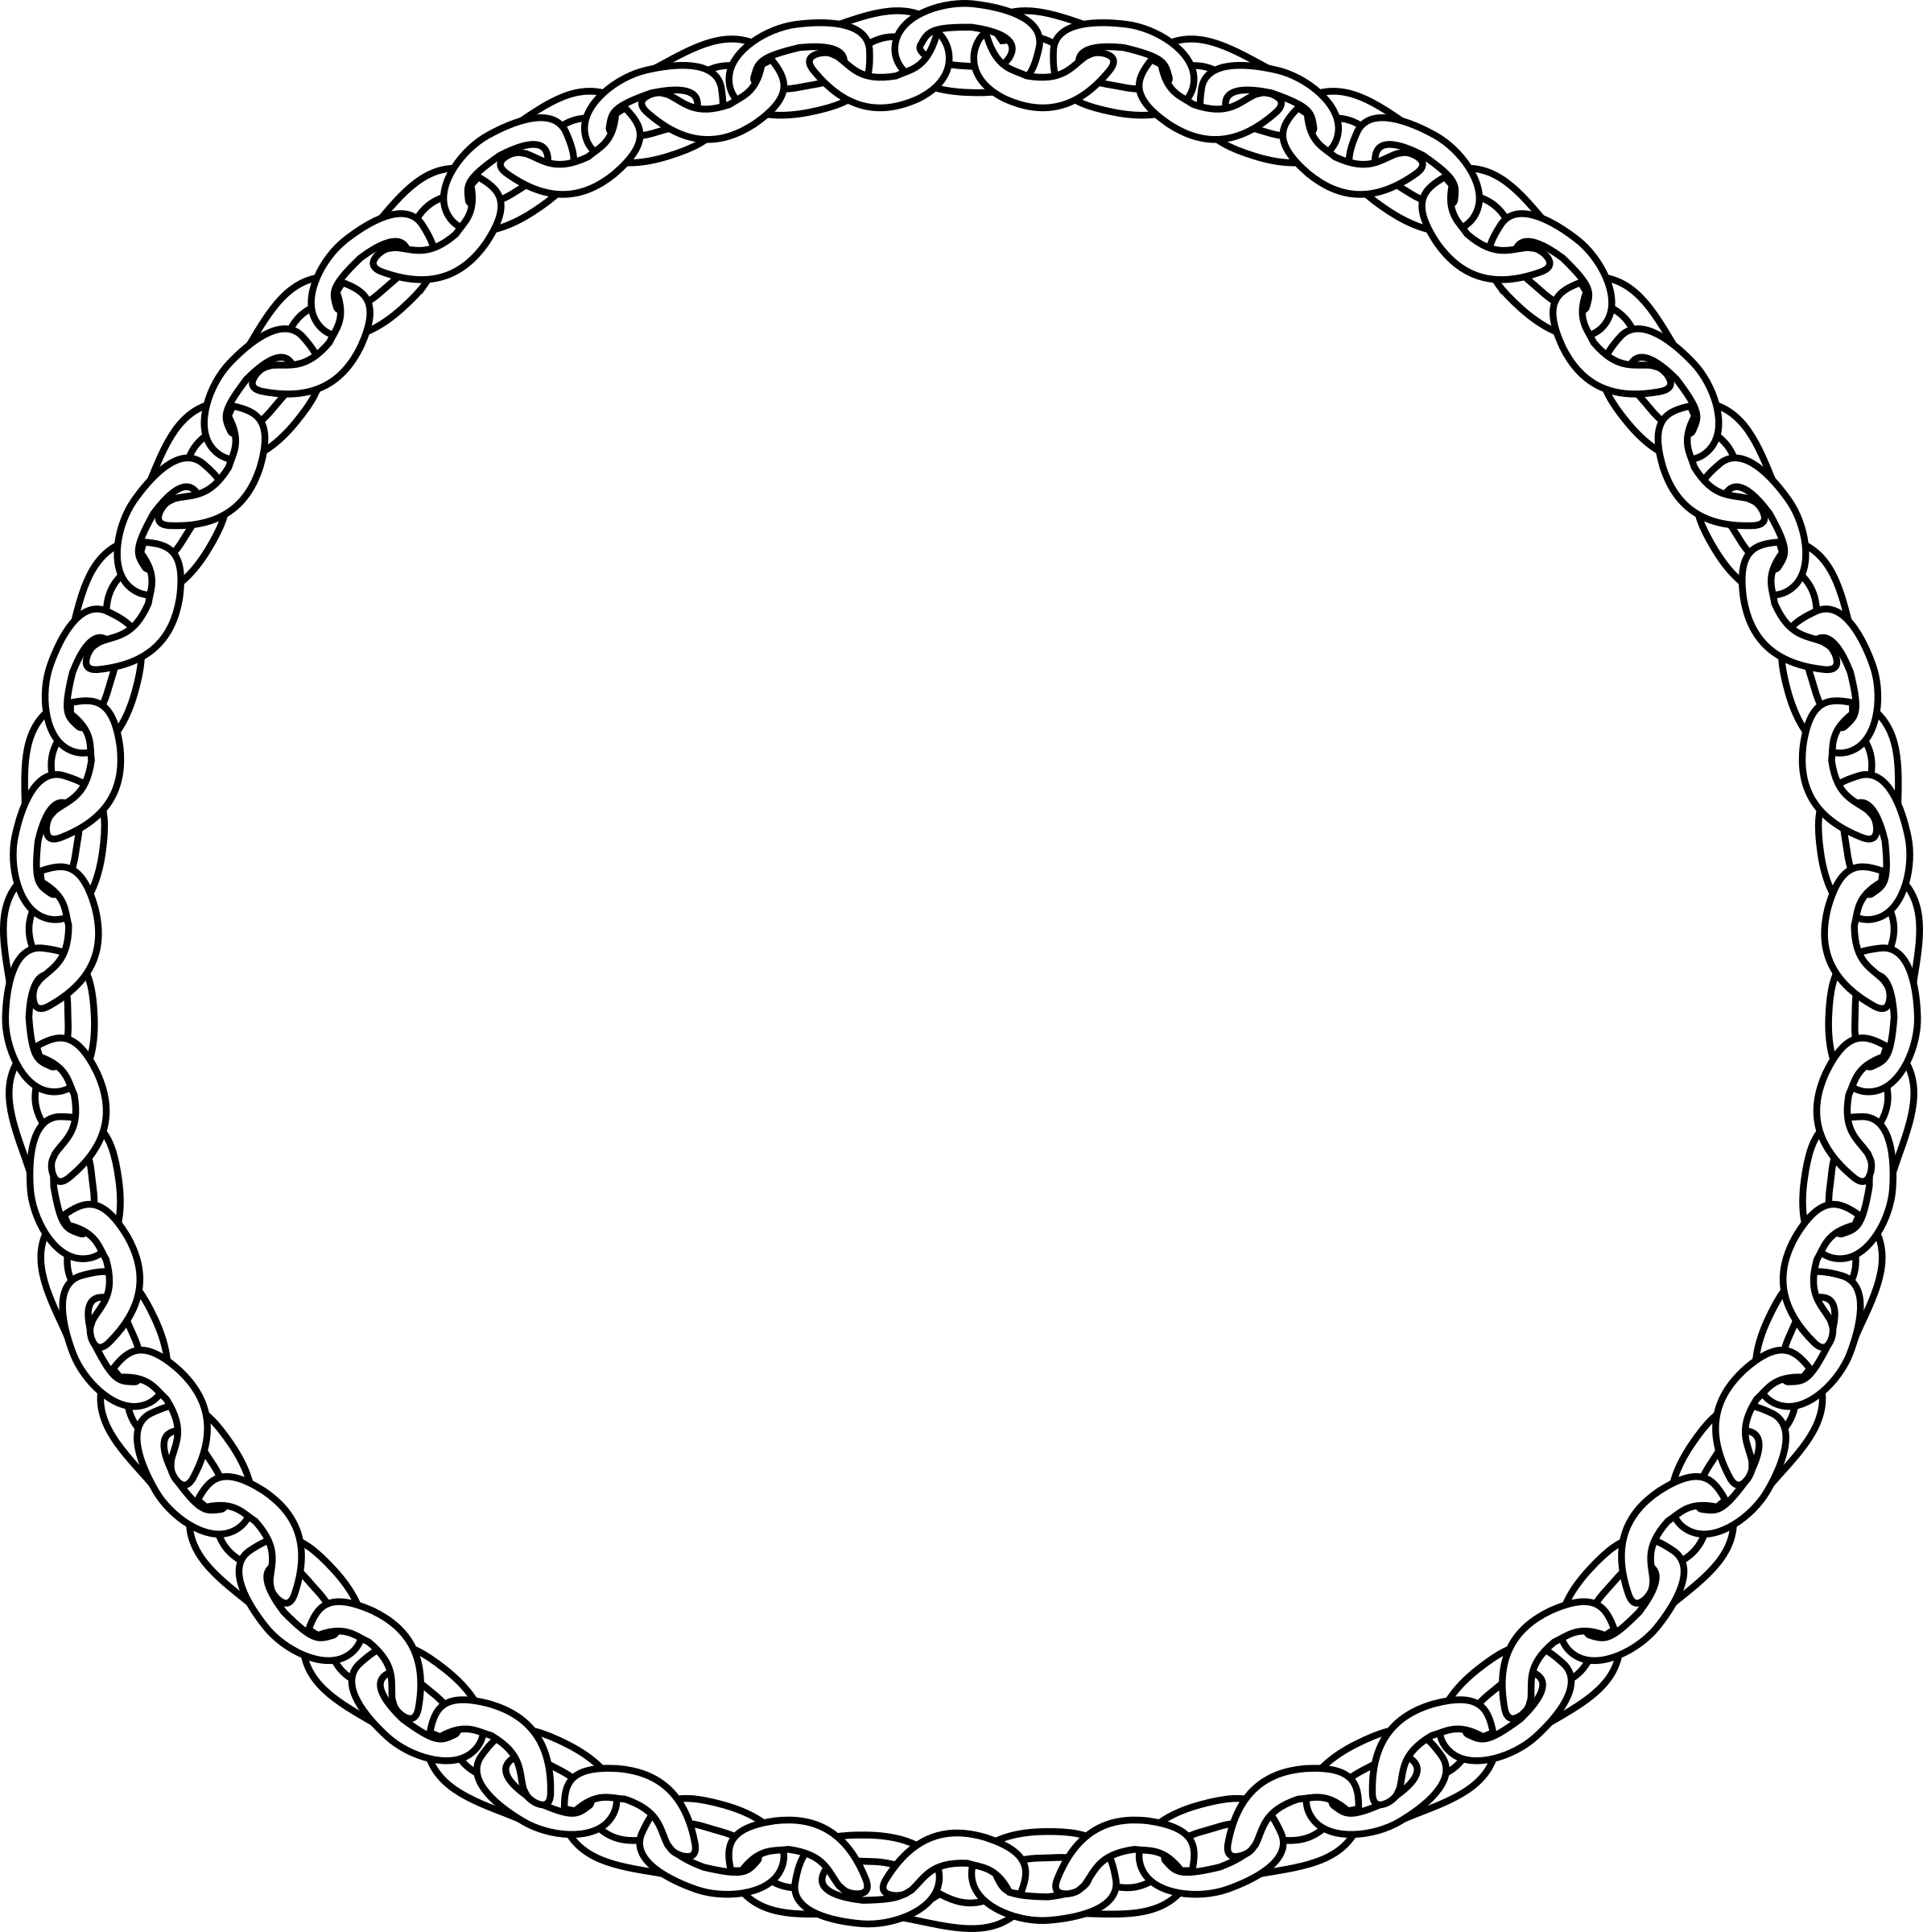 Free Chain Frame Cliparts, Download Free Clip Art, Free Clip